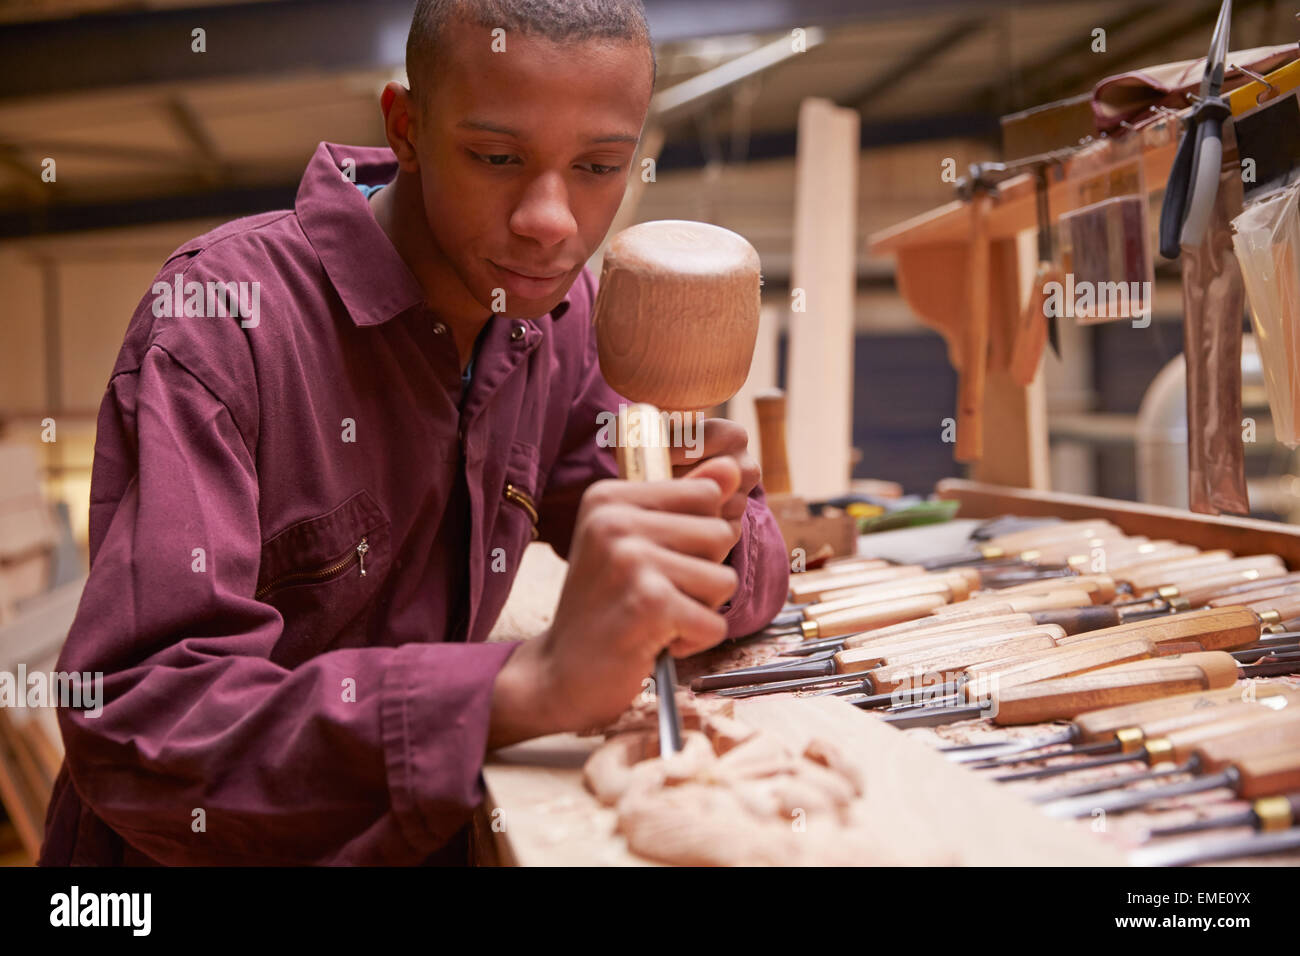 Apprentice Using Chisel To Carve Wood In Workshop Stock Photo